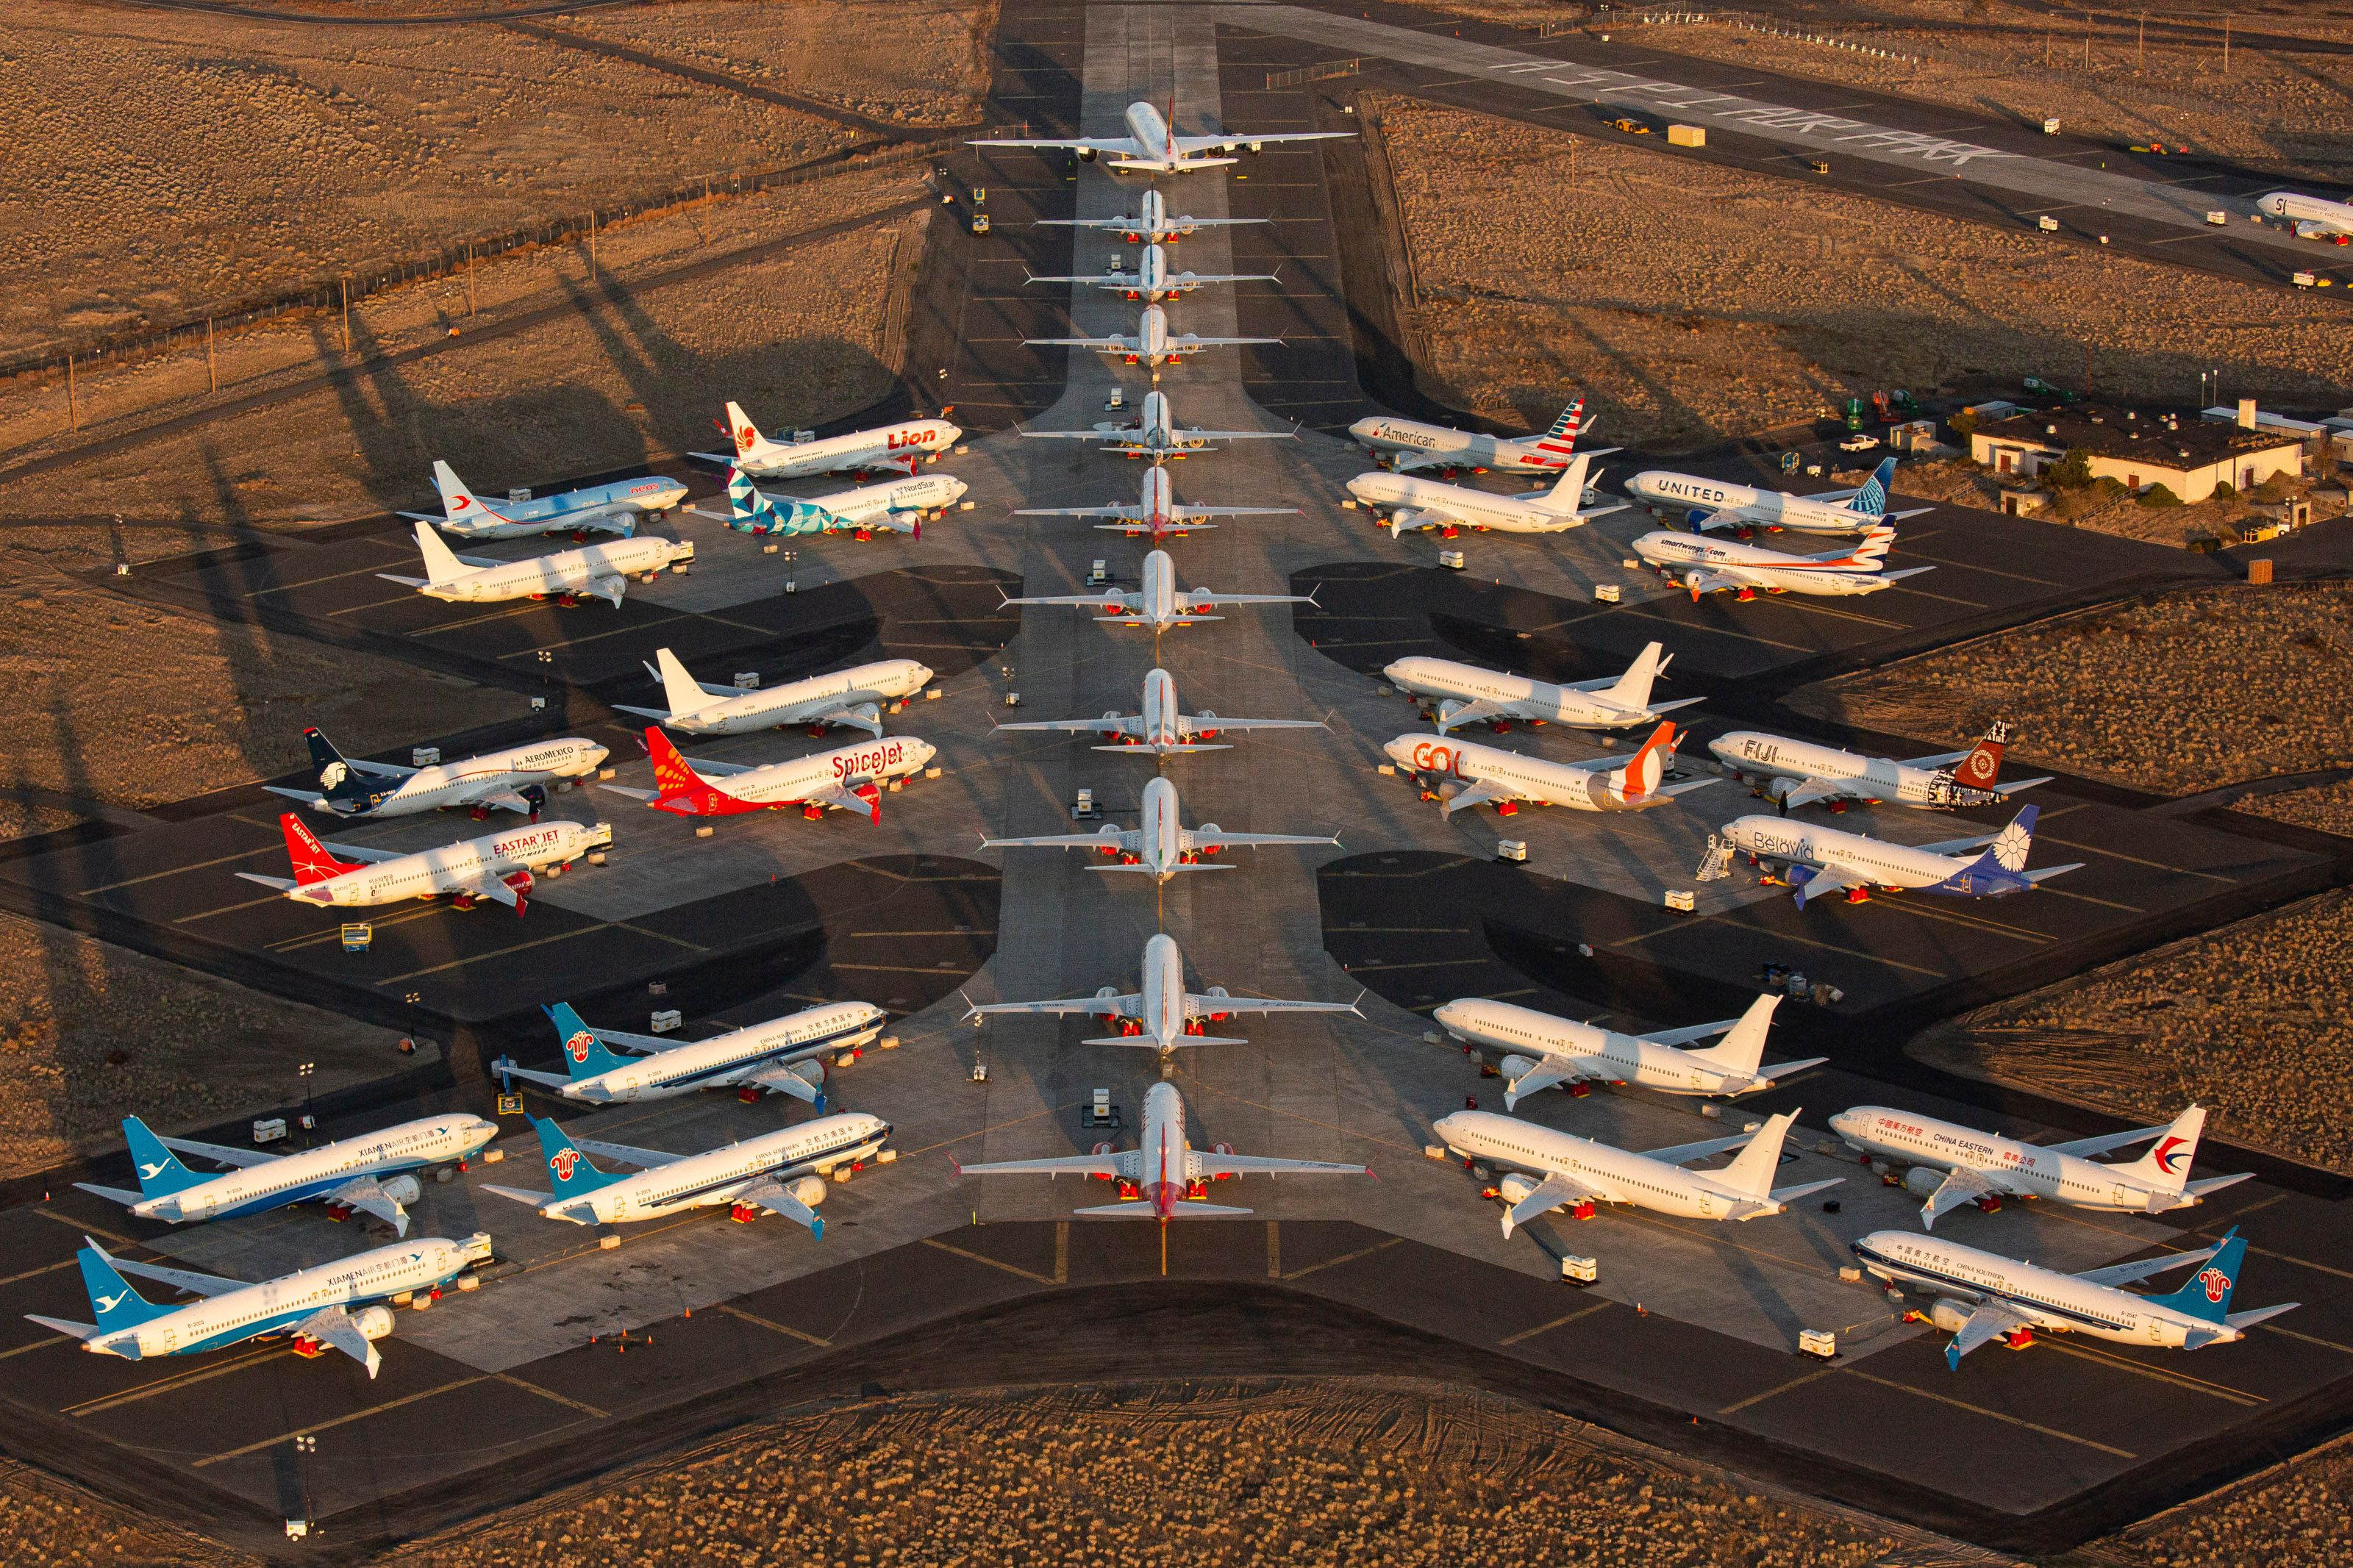 Planes parked